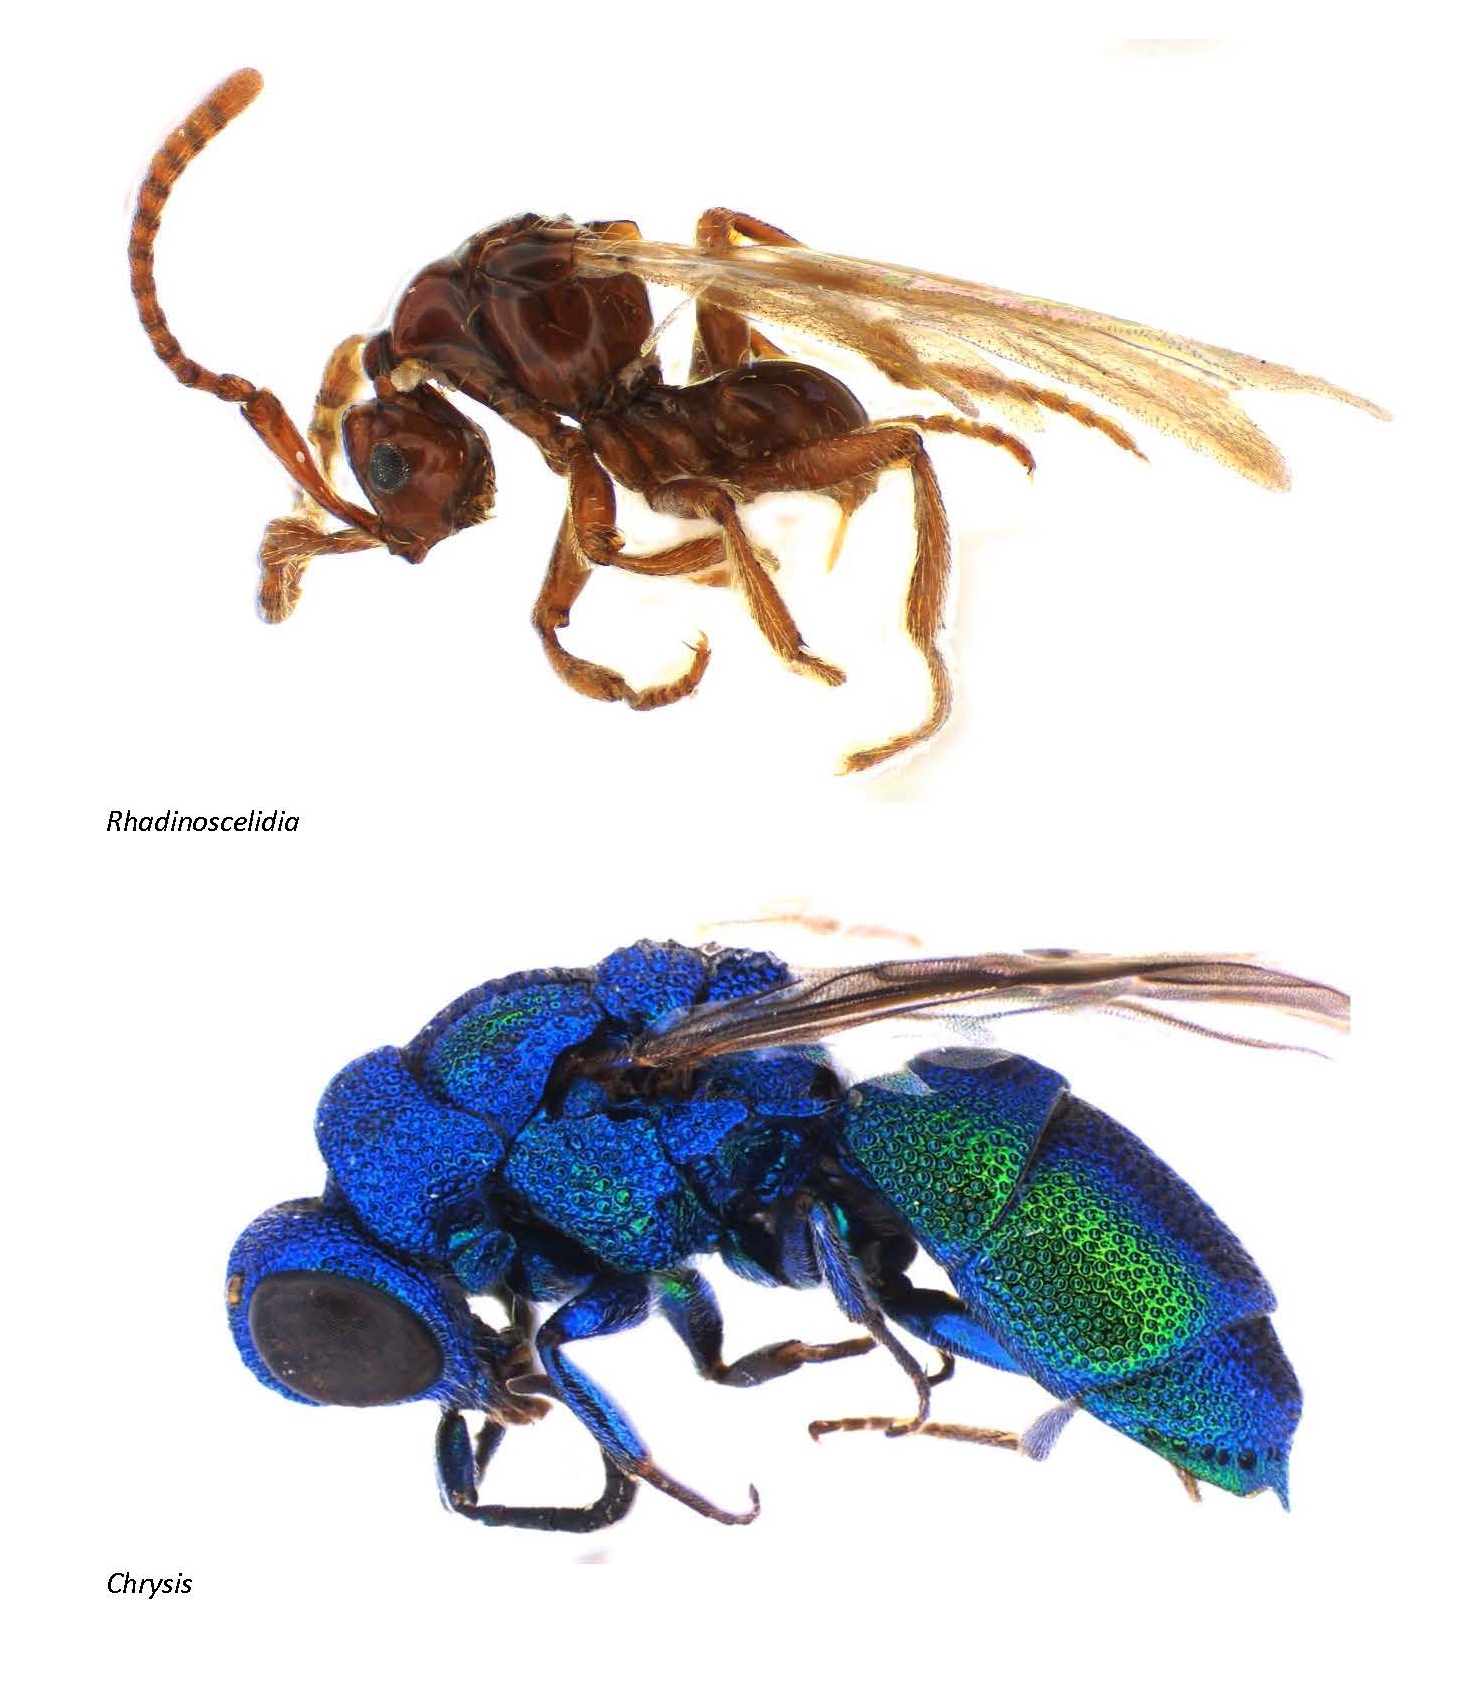 Rare 'cuckoo wasp' species found in Norway learns the 'language' of other  insects before attacking